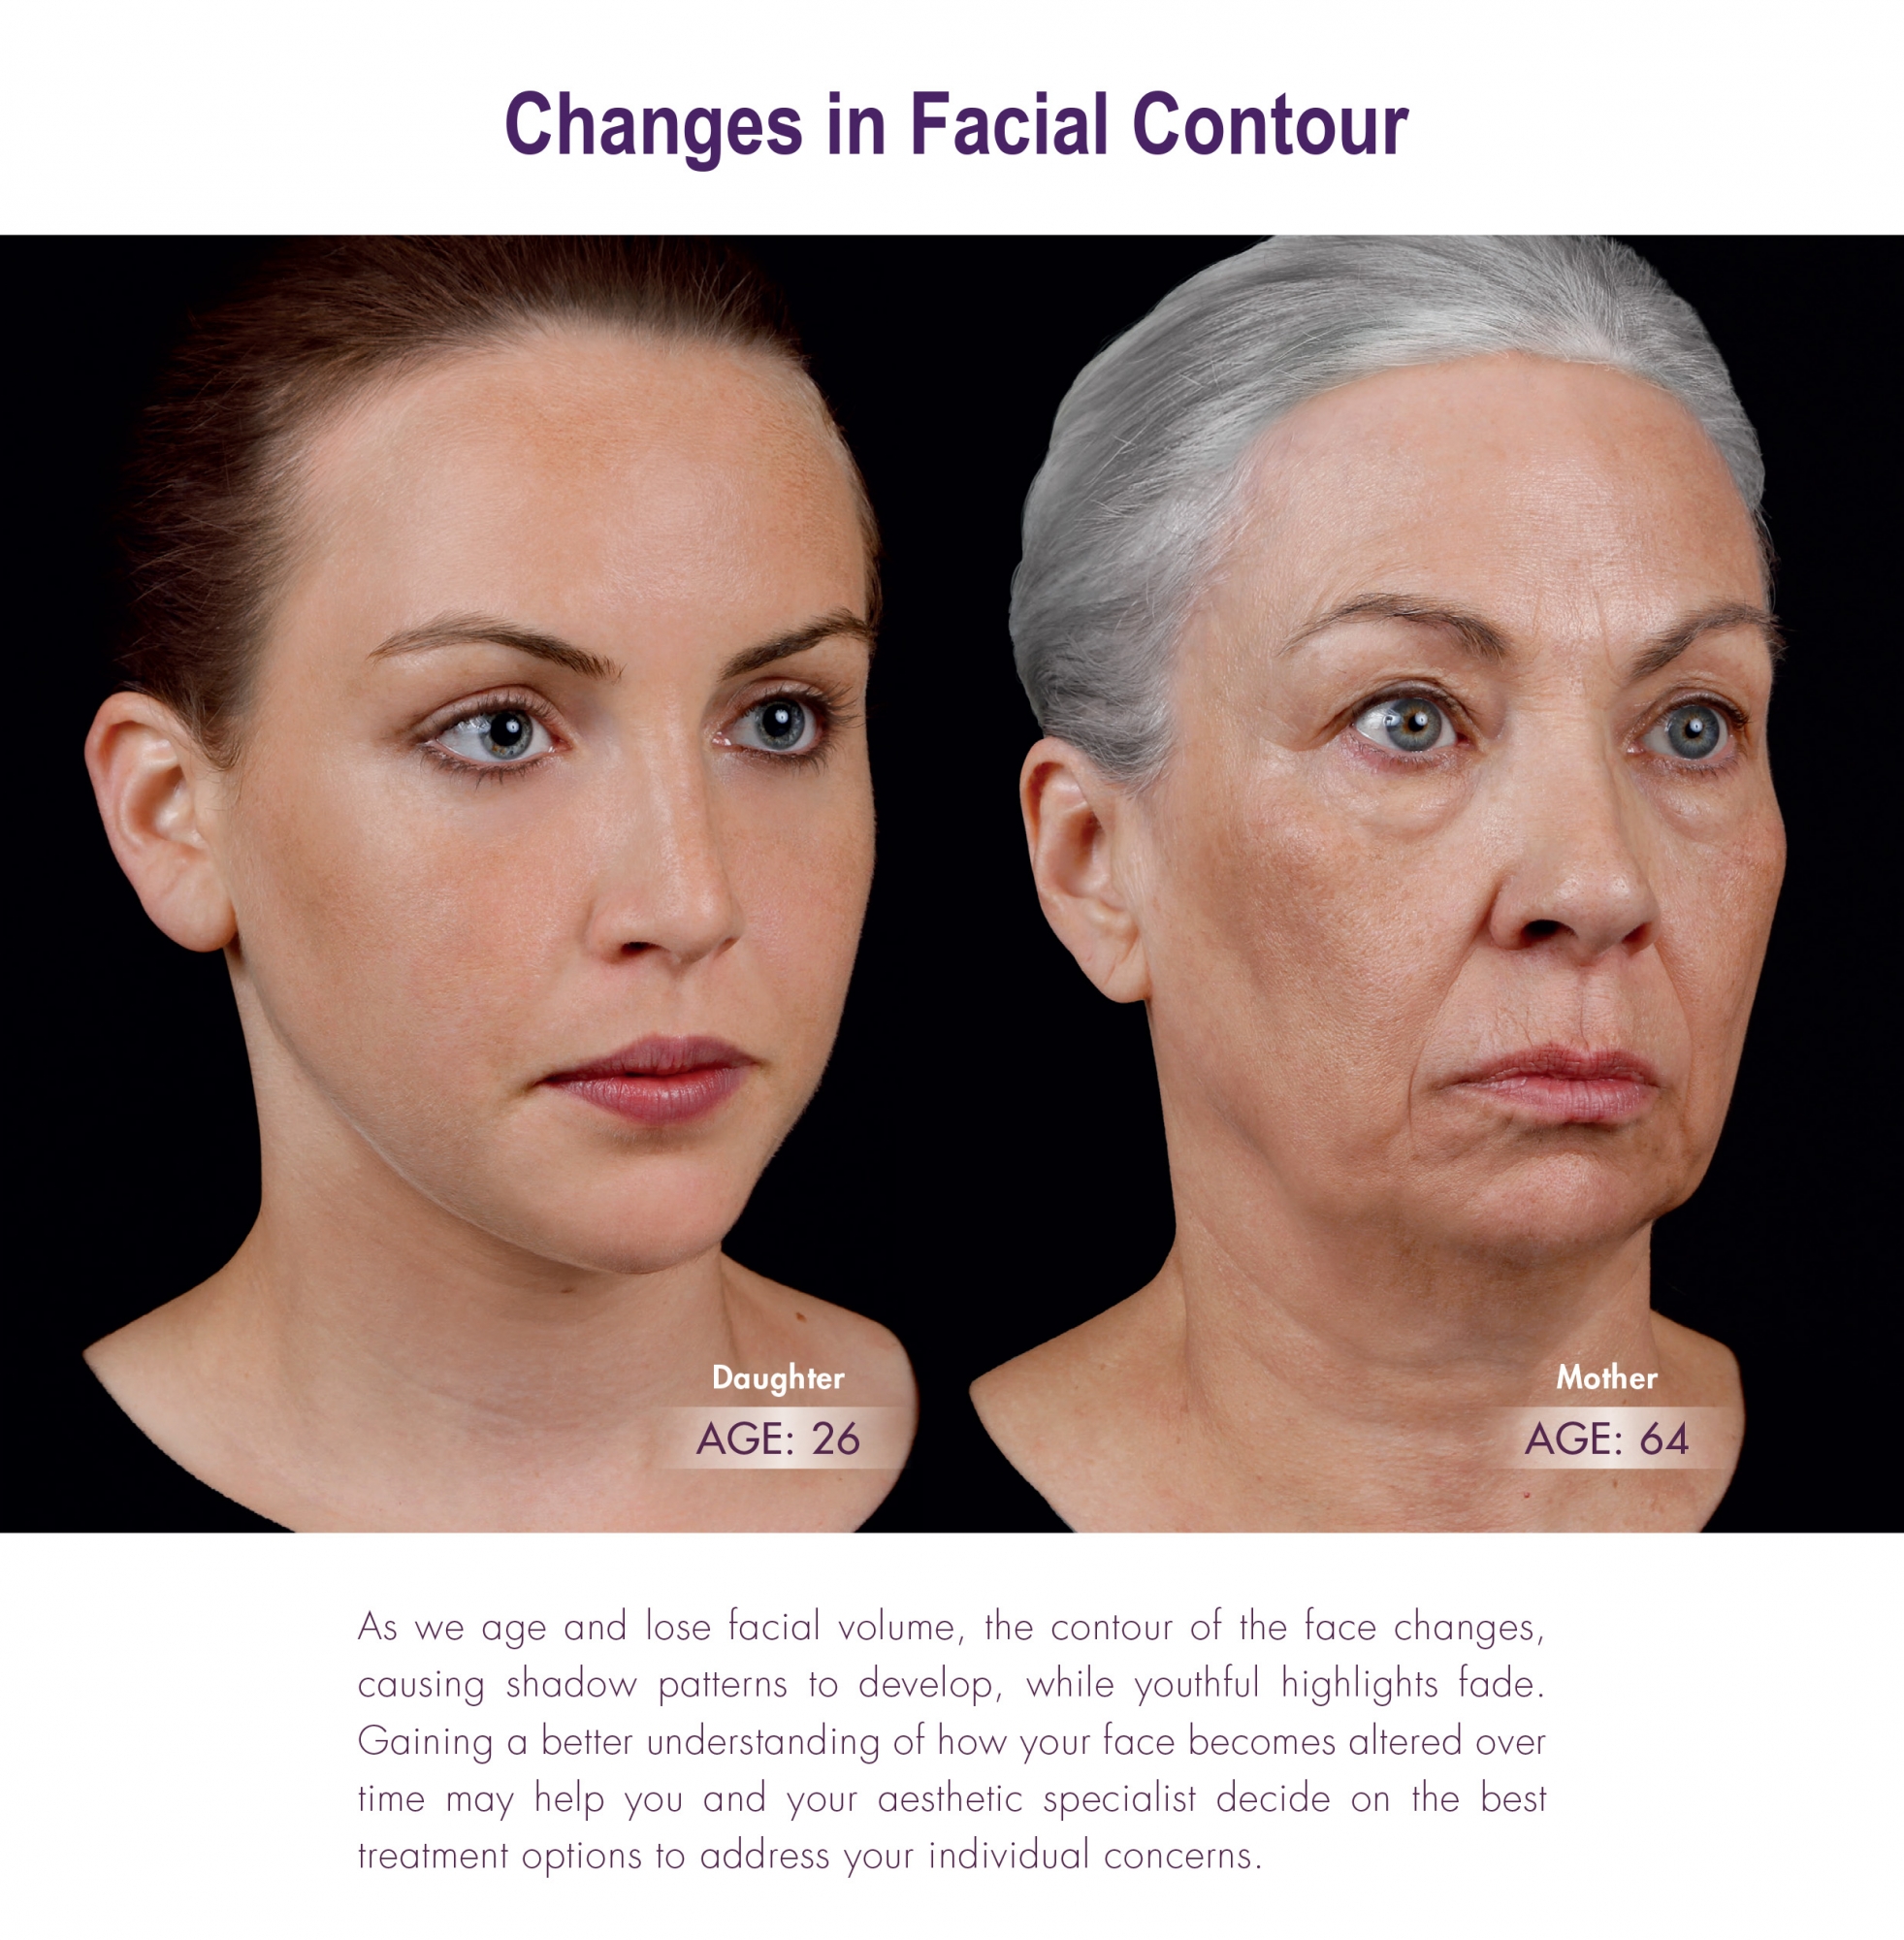 changes in facial contour with age - learn how Juvederm can help!